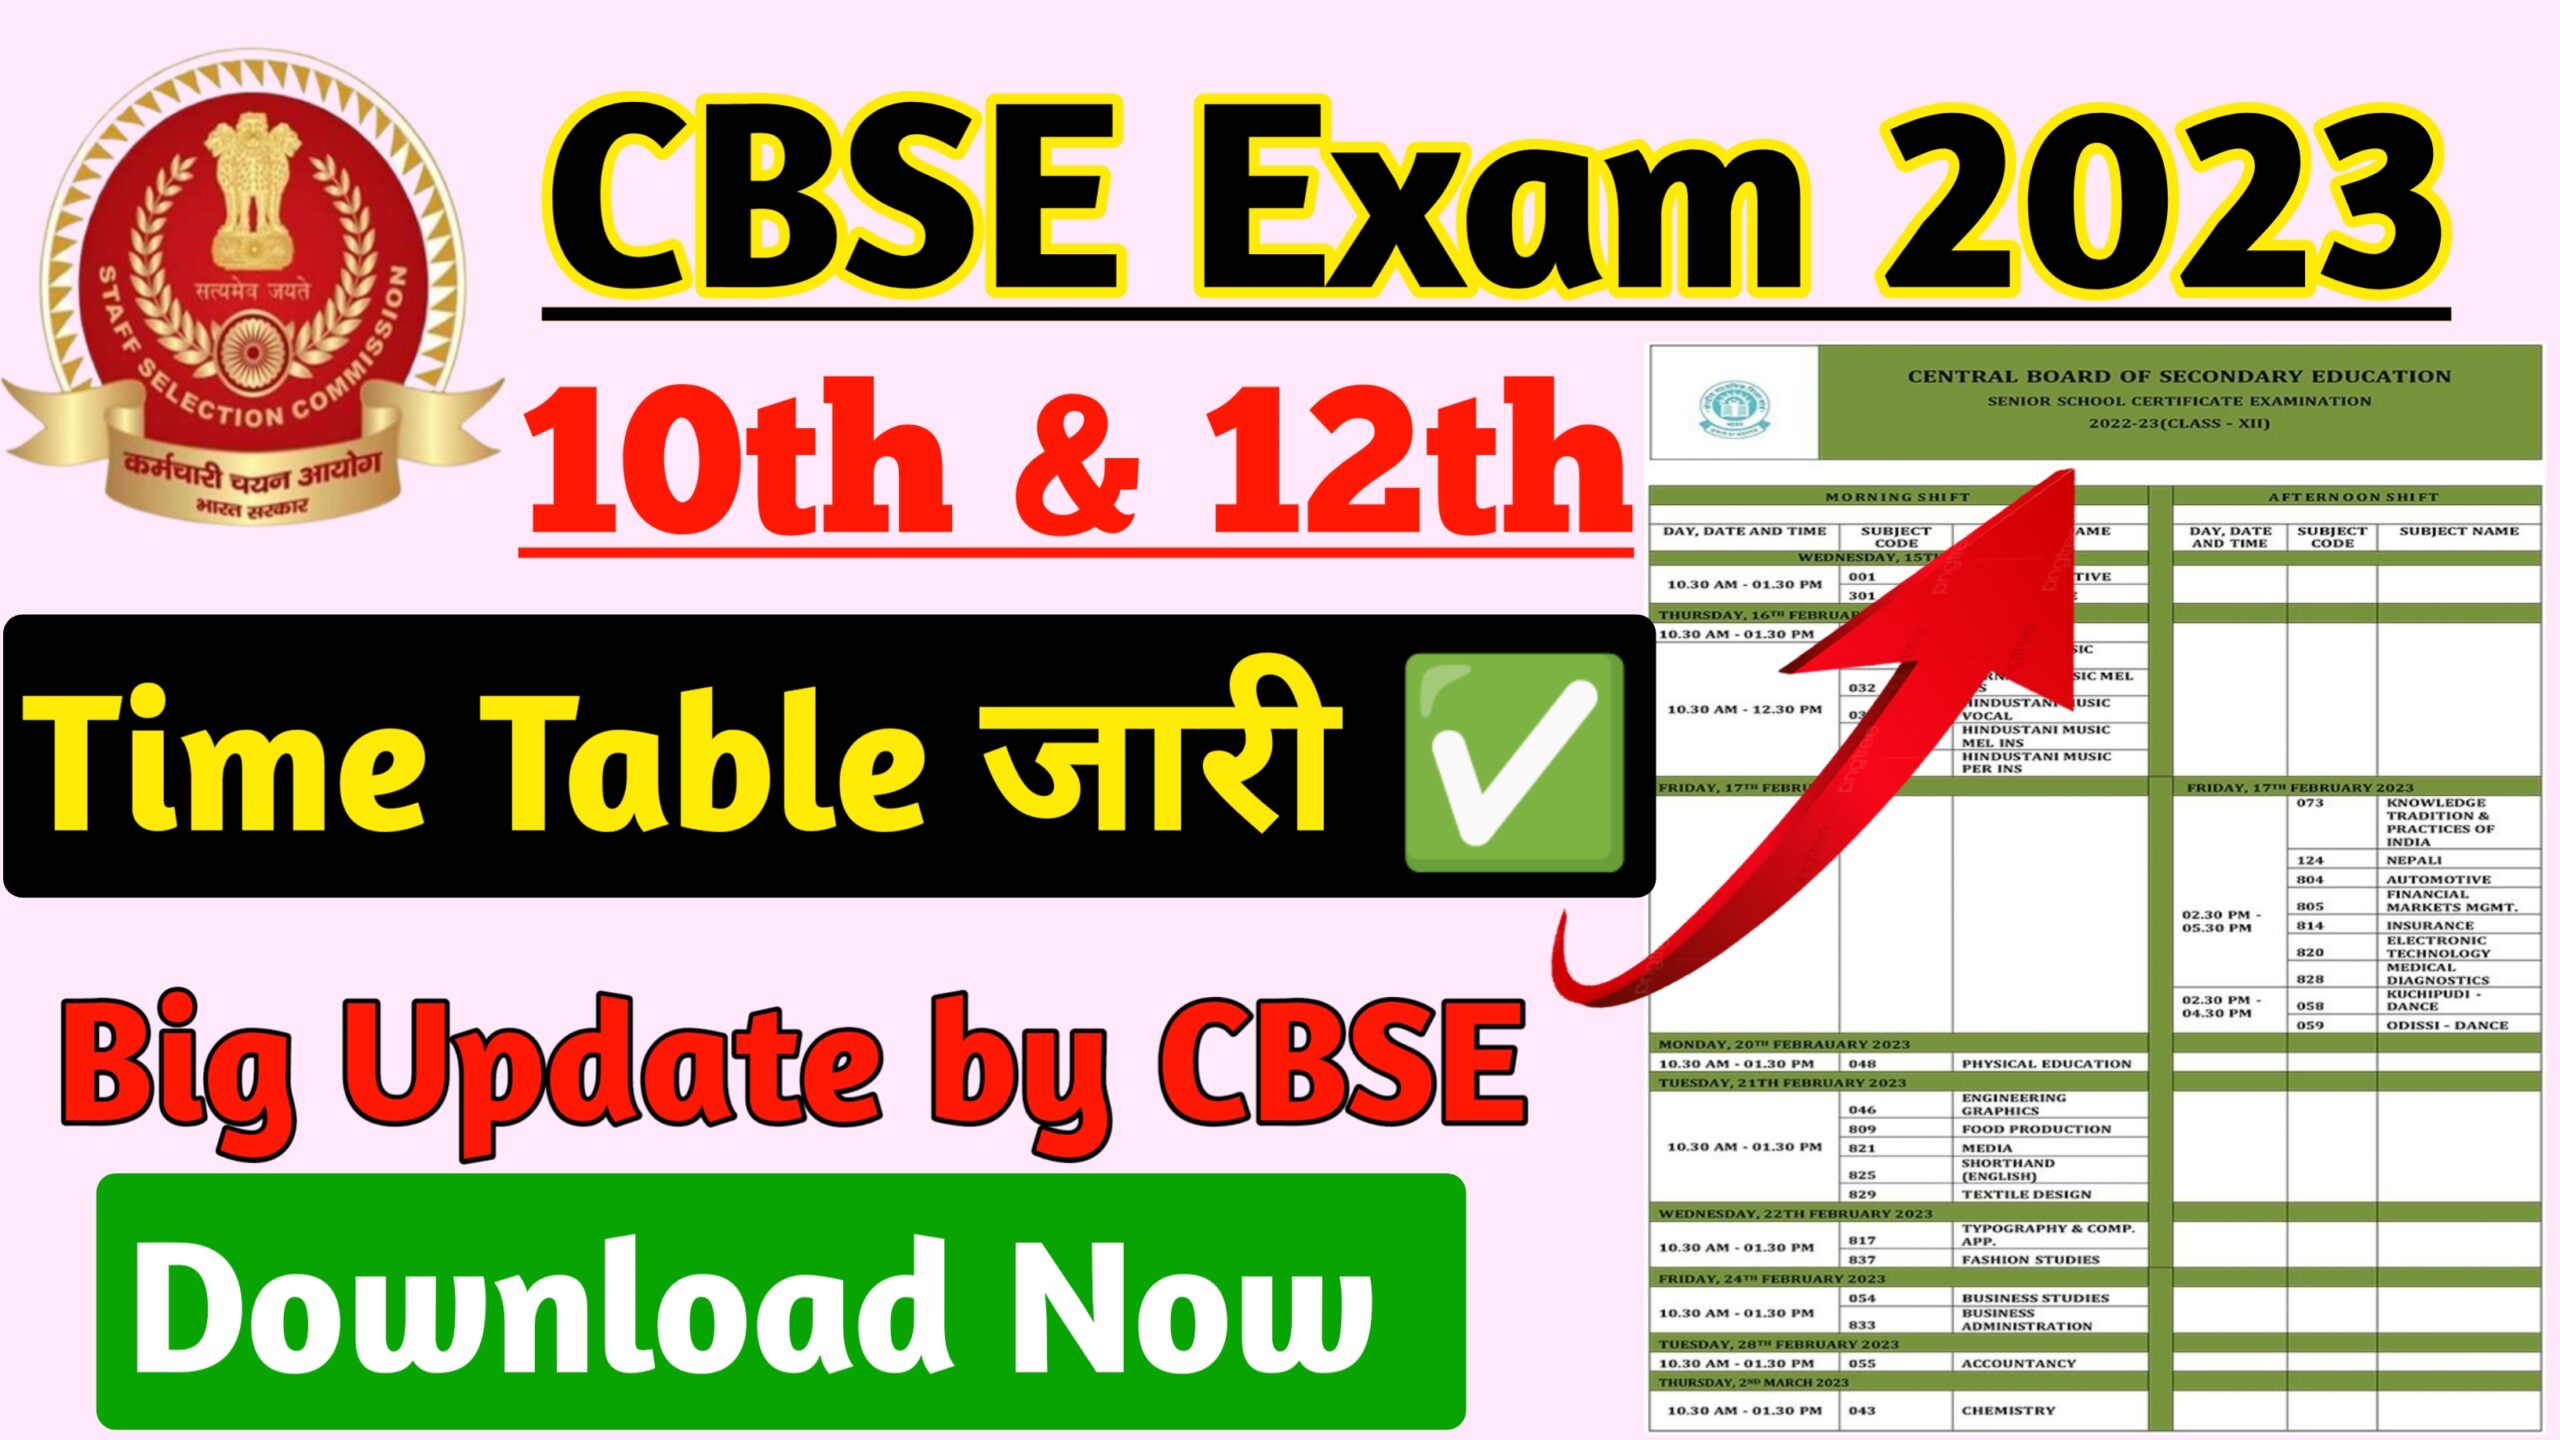 CBSE Exam 2023 Time Table Out